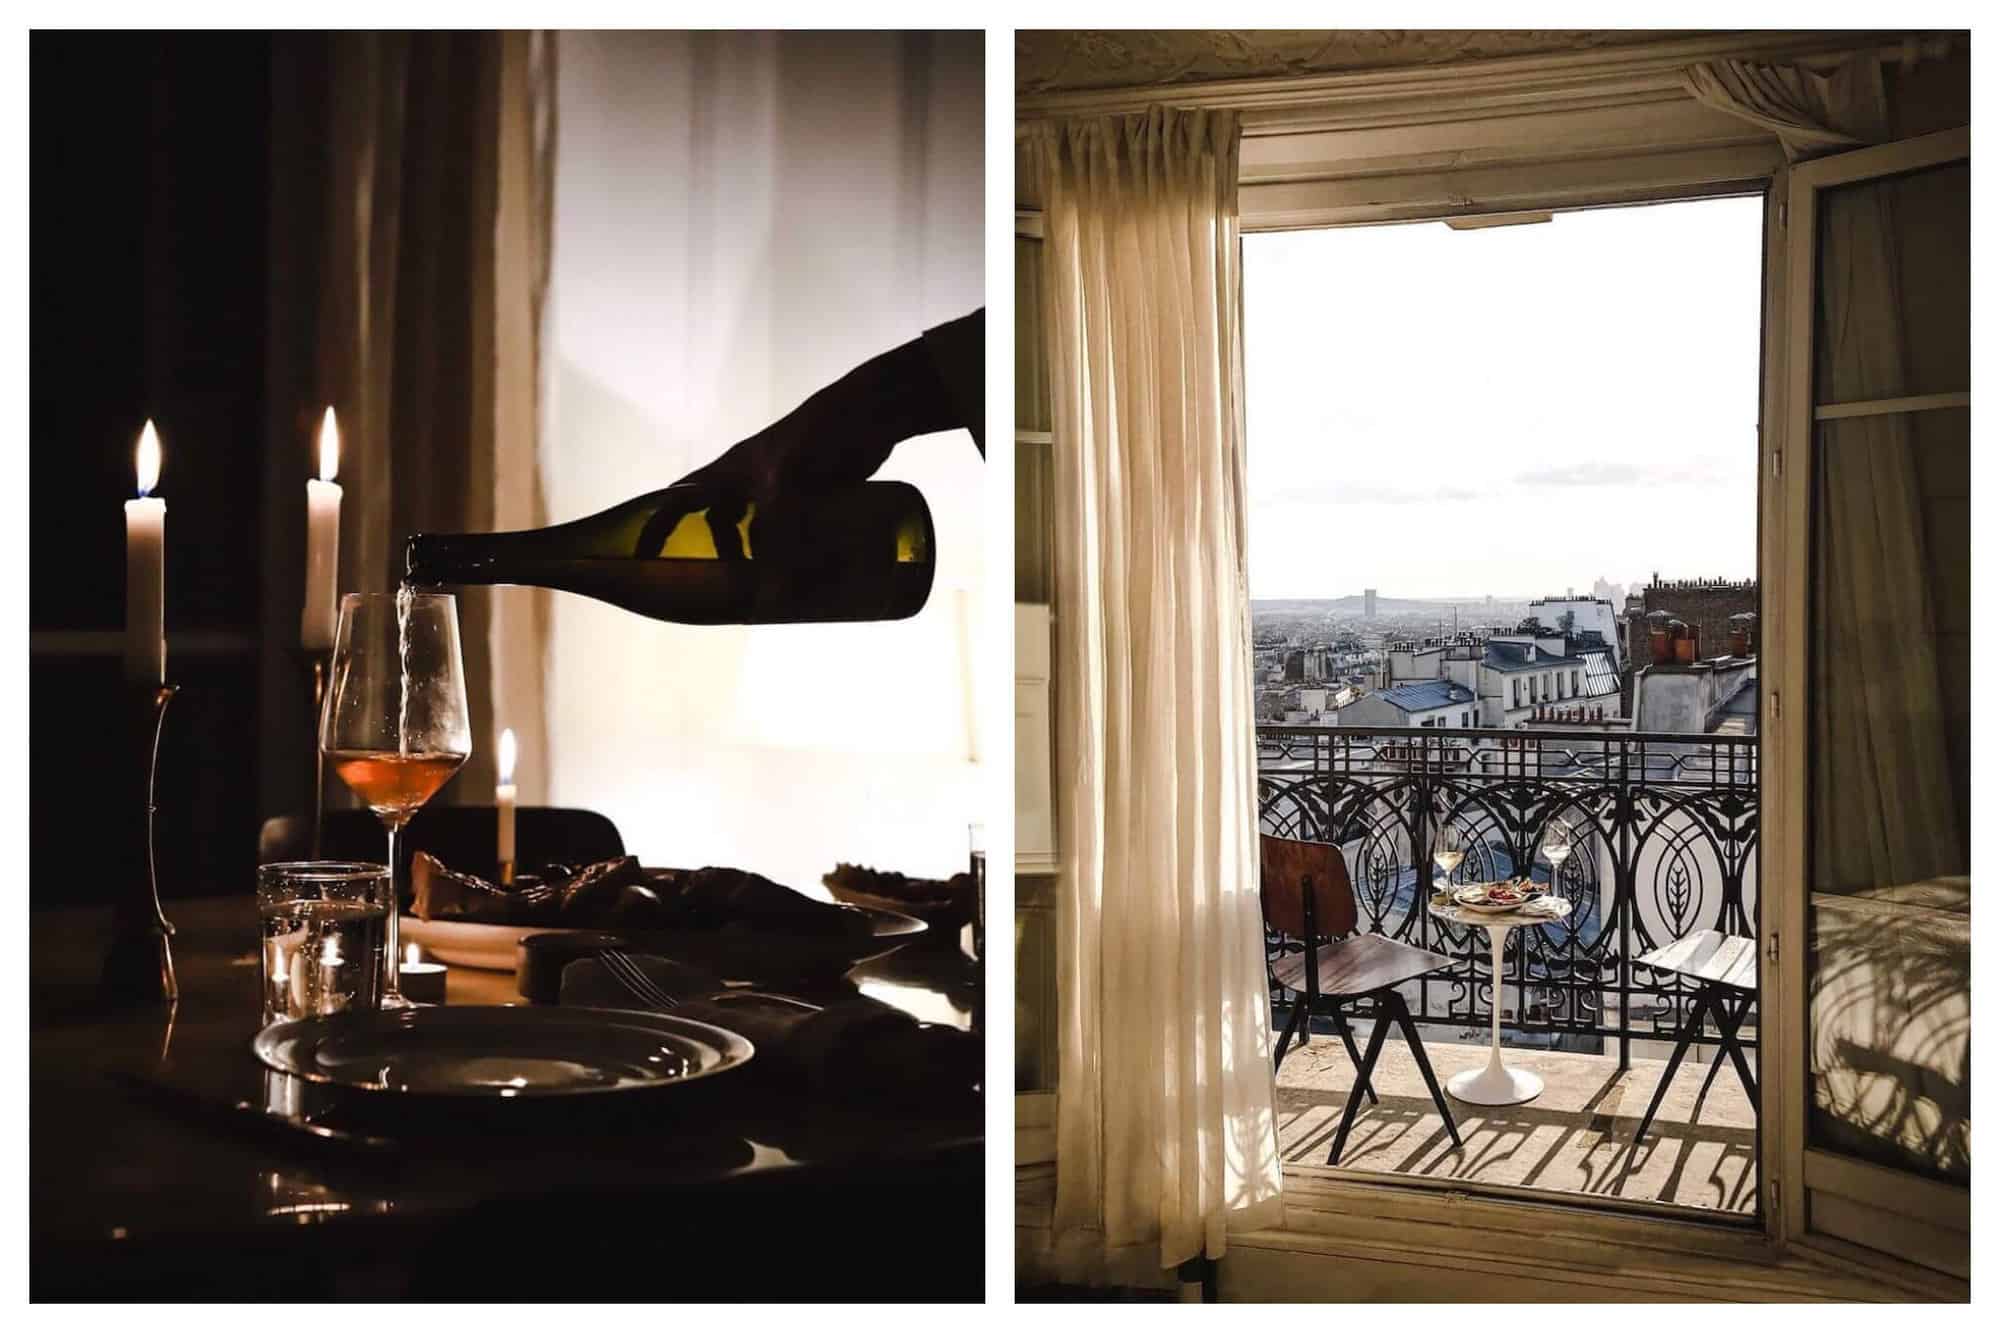 Left: a dimly lit room with a table with plates, candles, and a wine glass. Someone is pouring a bottle of wine. Right: View of a room with a balcony overlooking Paris. There is a table with two glasses and food and two chairs.